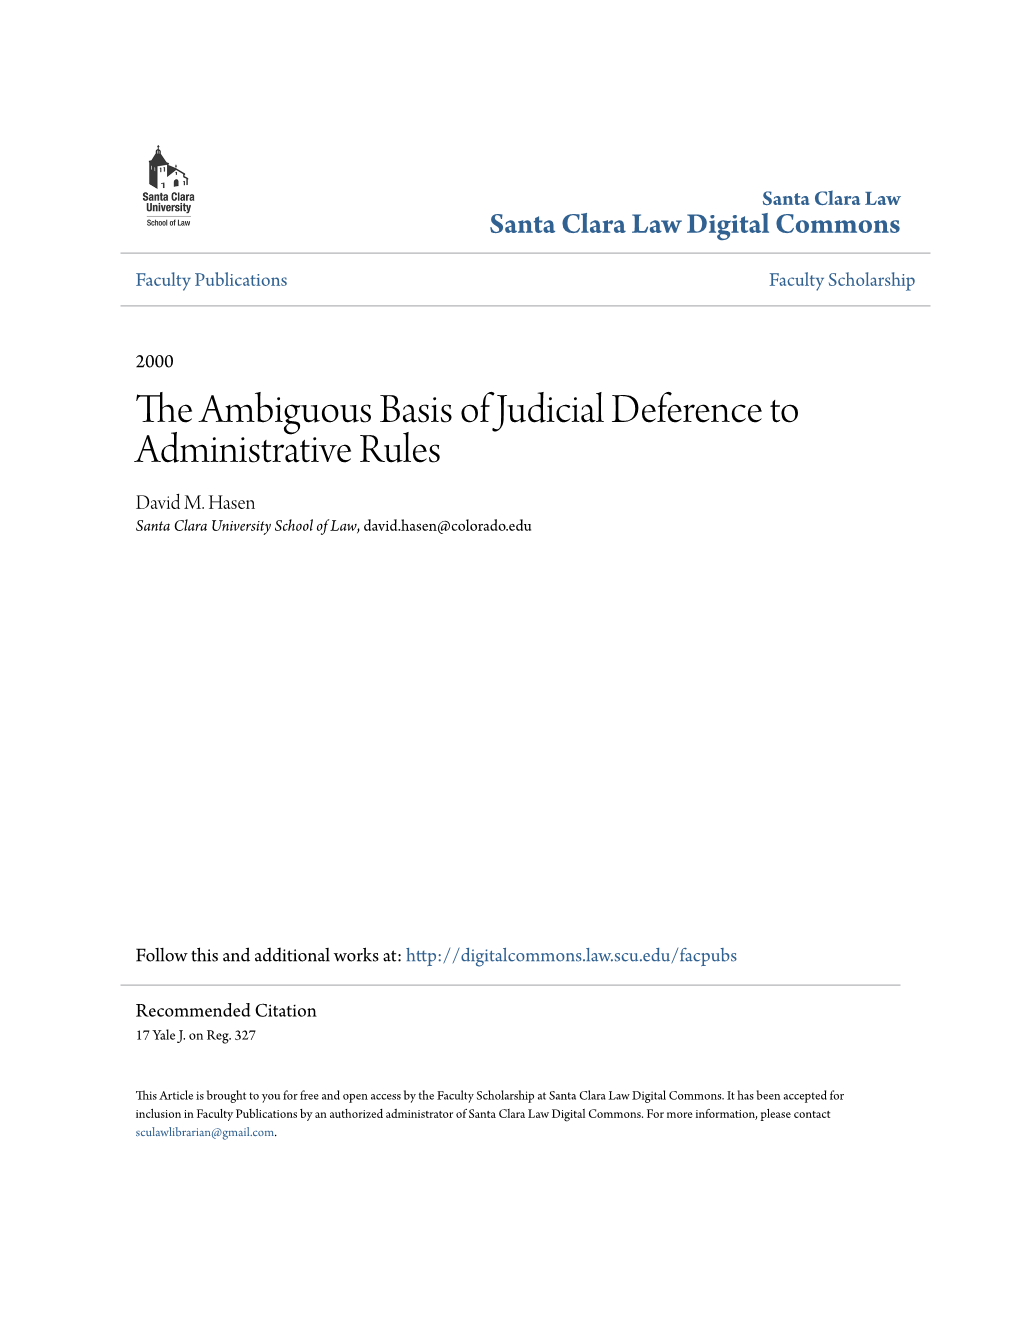 The Ambiguous Basis of Judicial Deference to Administrative Rules David M